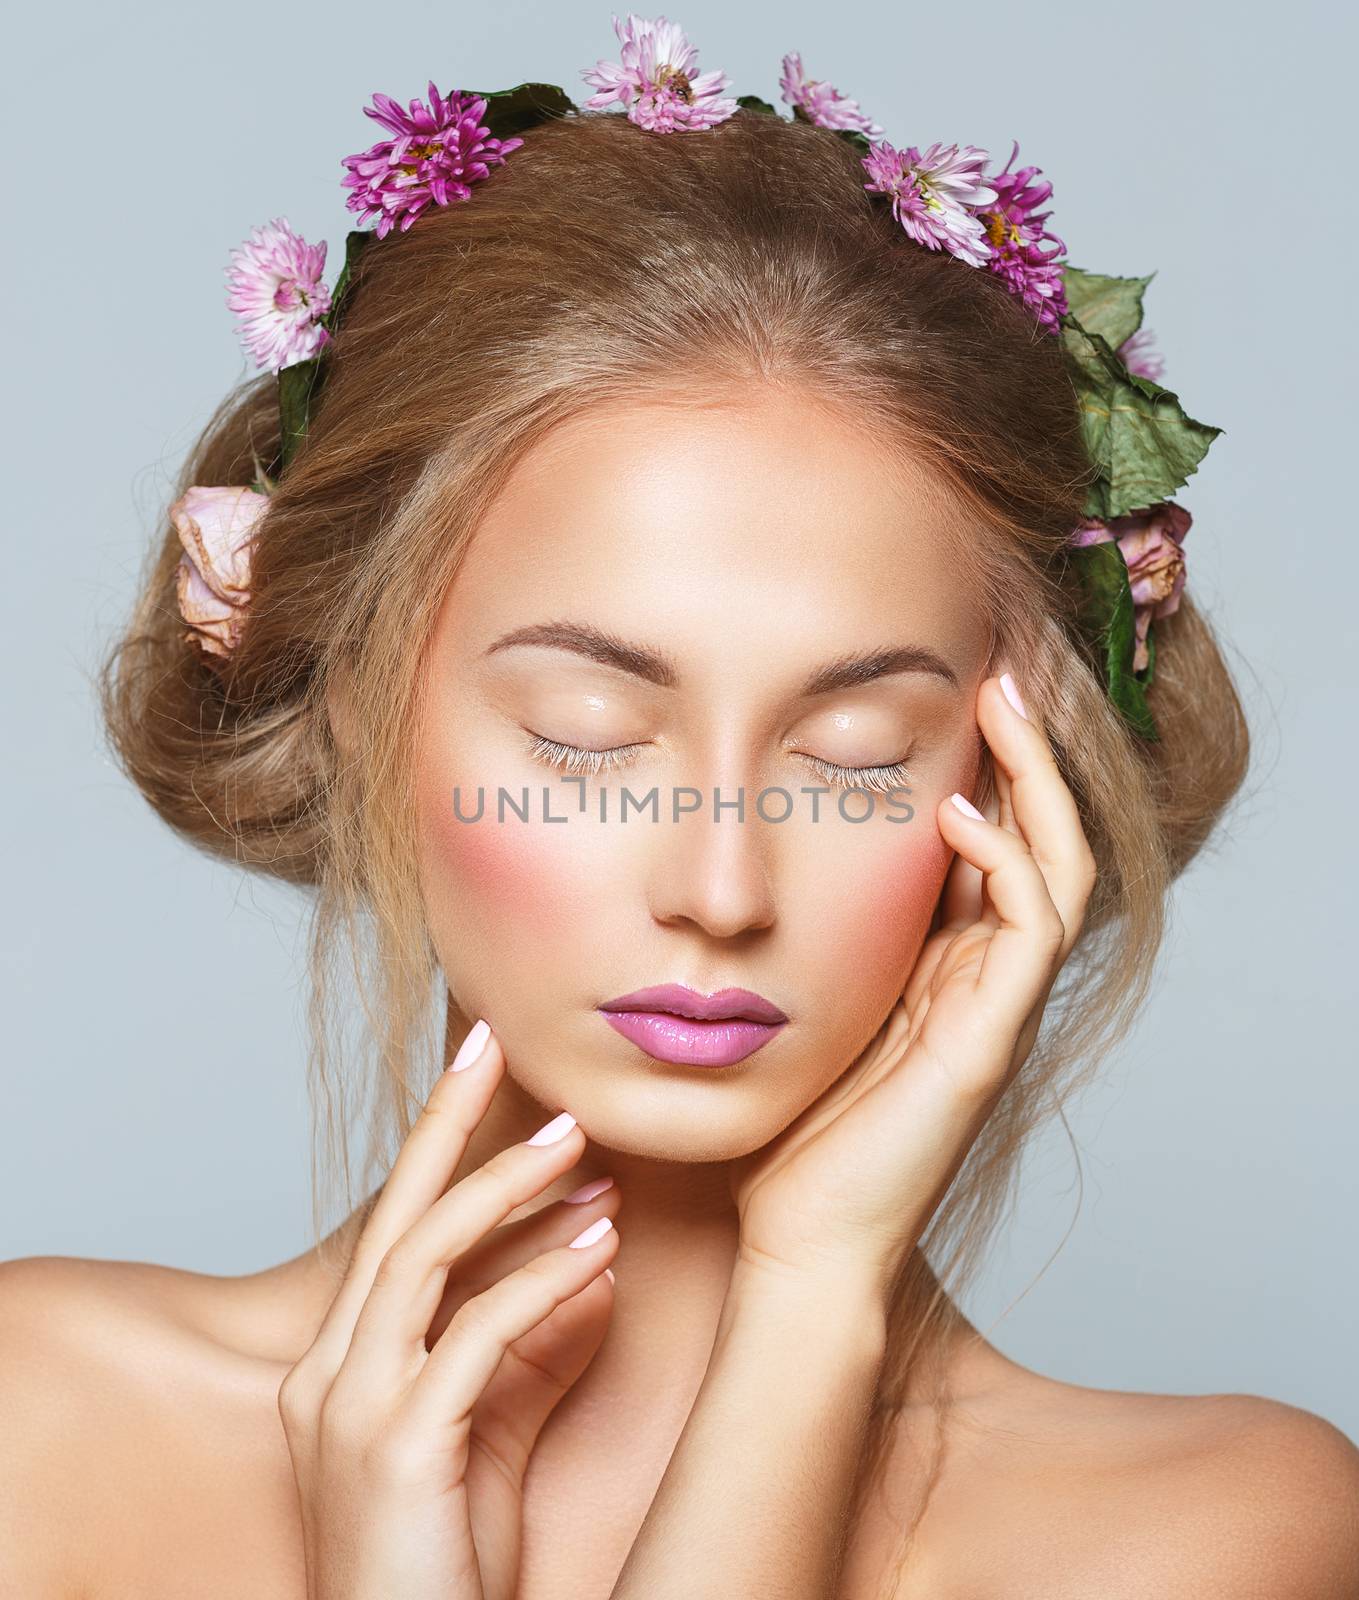 Lovely model with shiny volume curly hair with flowers, winter white eyelashes make-up, vivid lips and pink cheeks. Christmas look